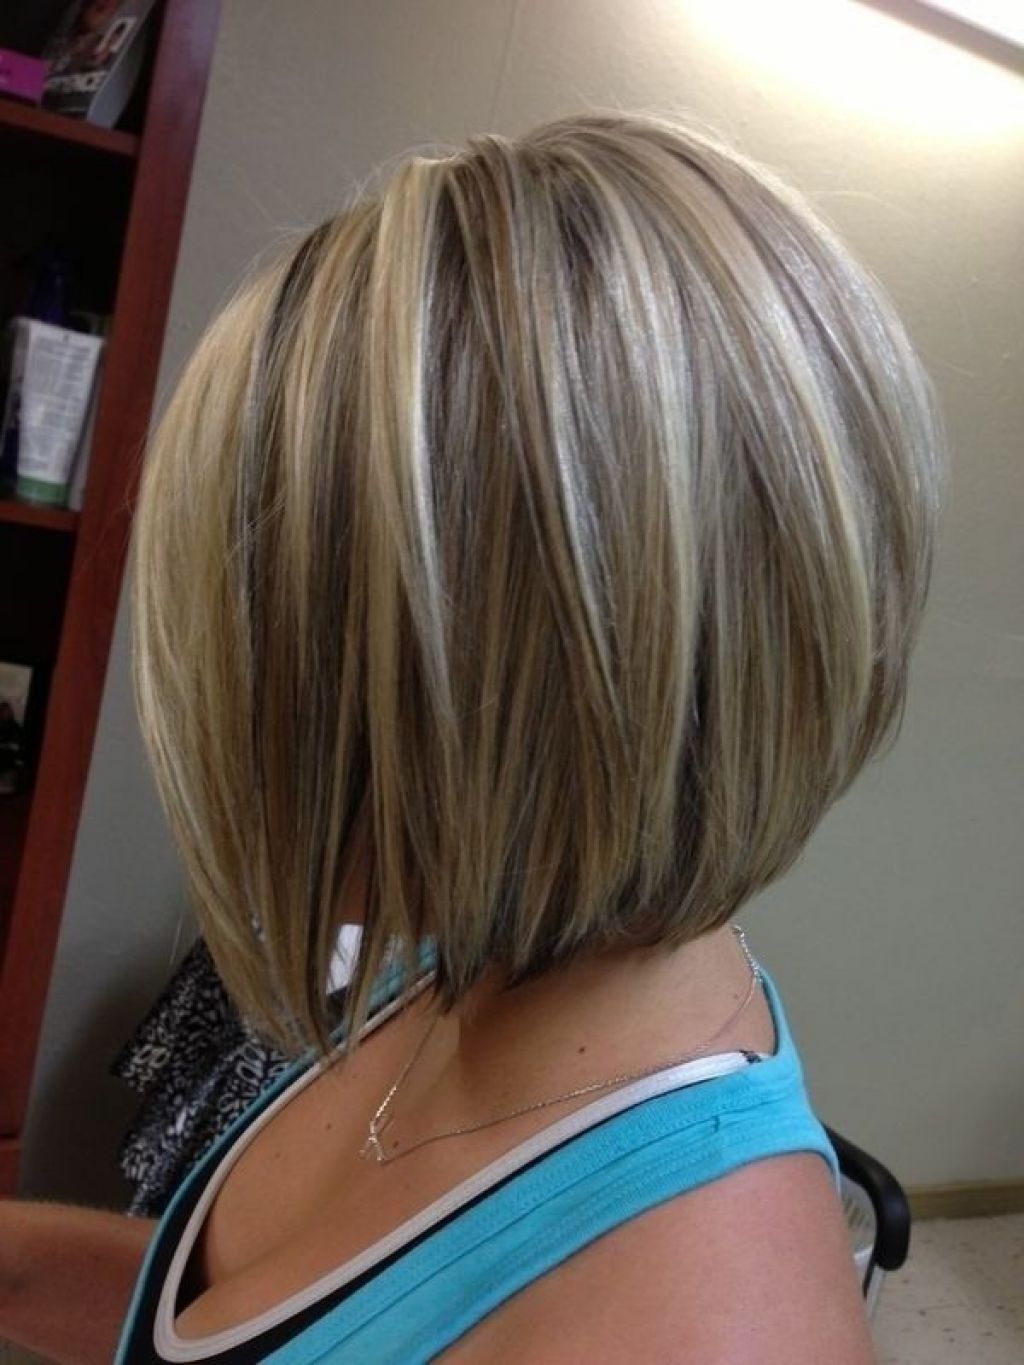 Pinieda Blank On Cabelo, Maquiagem E Beleza | Pinterest Throughout Southern Belle Bob Haircuts With Gradual Layers (View 11 of 20)